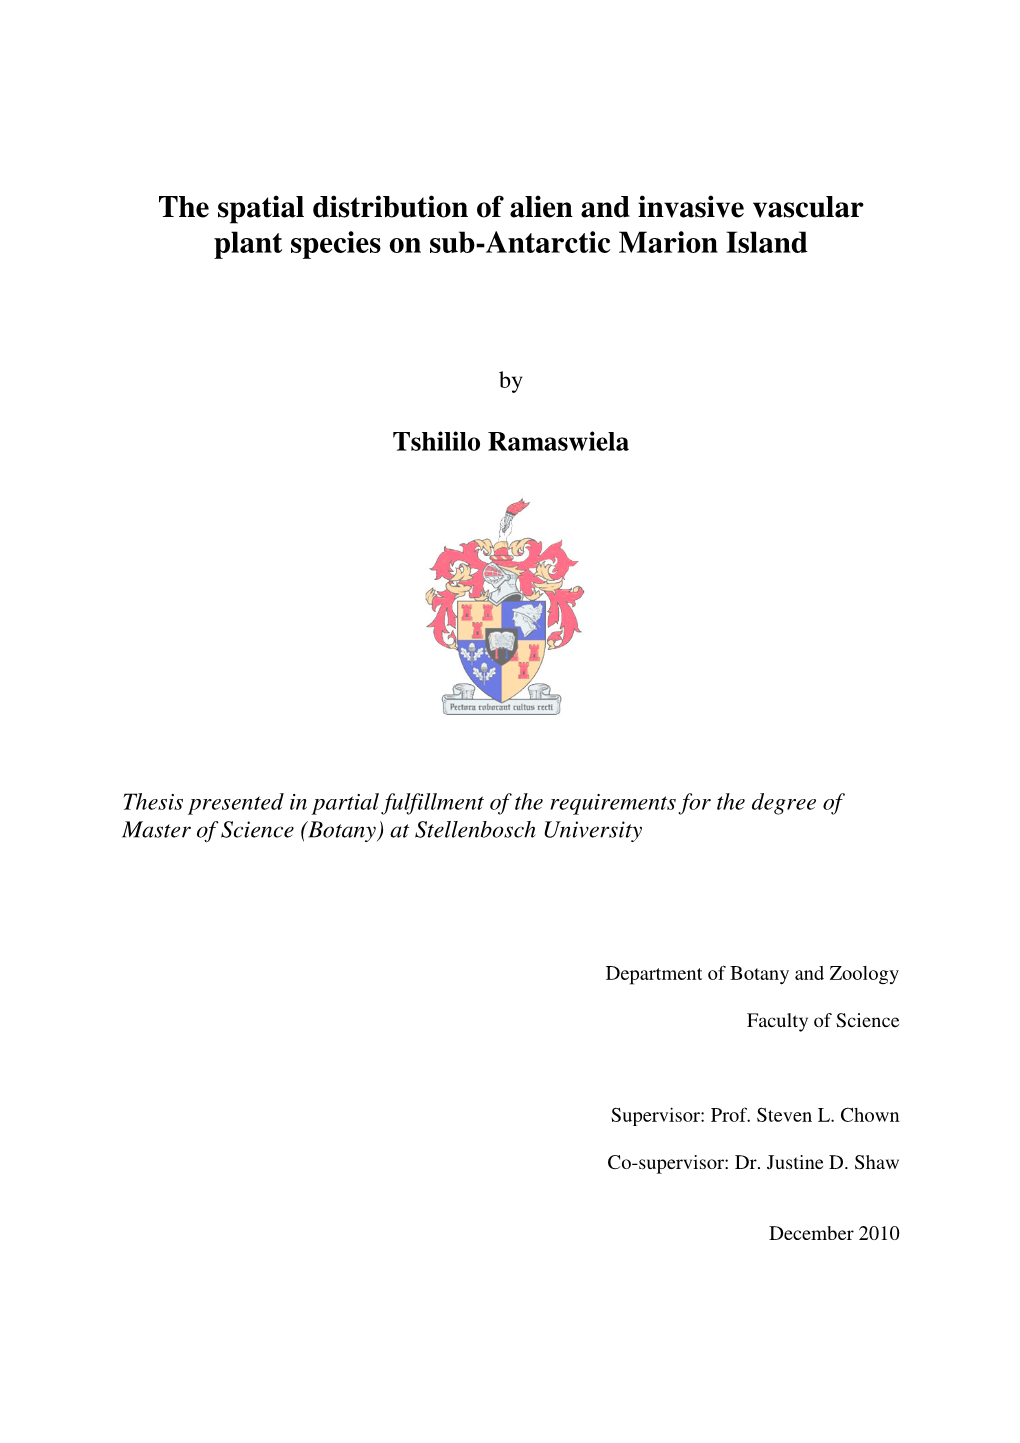 The Spatial Distribution of Alien and Invasive Vascular Plant Species on Sub-Antarctic Marion Island